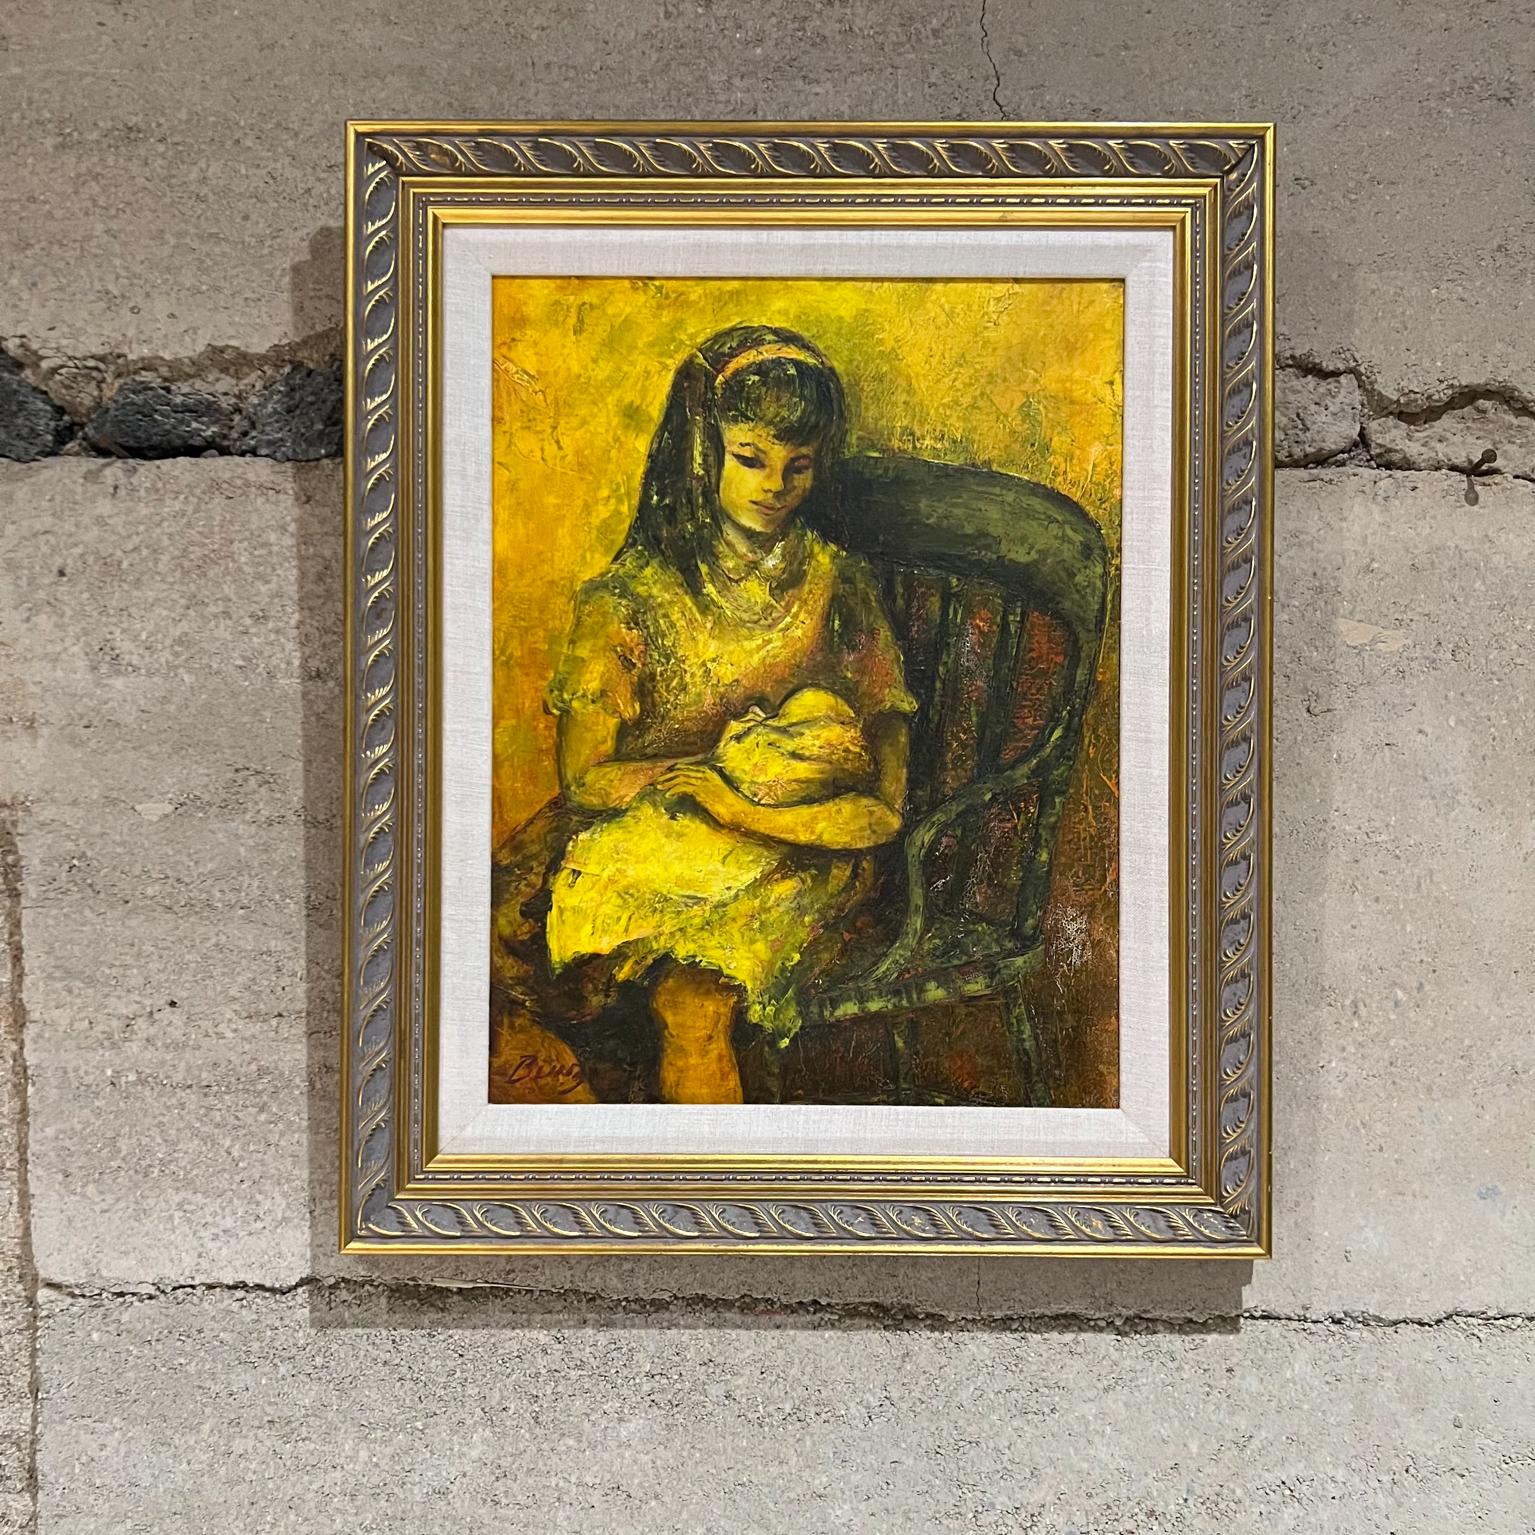 Vintage Artwork painting young mother with baby framed and signed
Measures: Frame 23.25 tall x 19.5 width x 1.5 depth Art 17.5 tall x 13.25
In the artistic style of Robert Philipp.
Signed art bottom left, hard to read.
Preowned Original vintage,